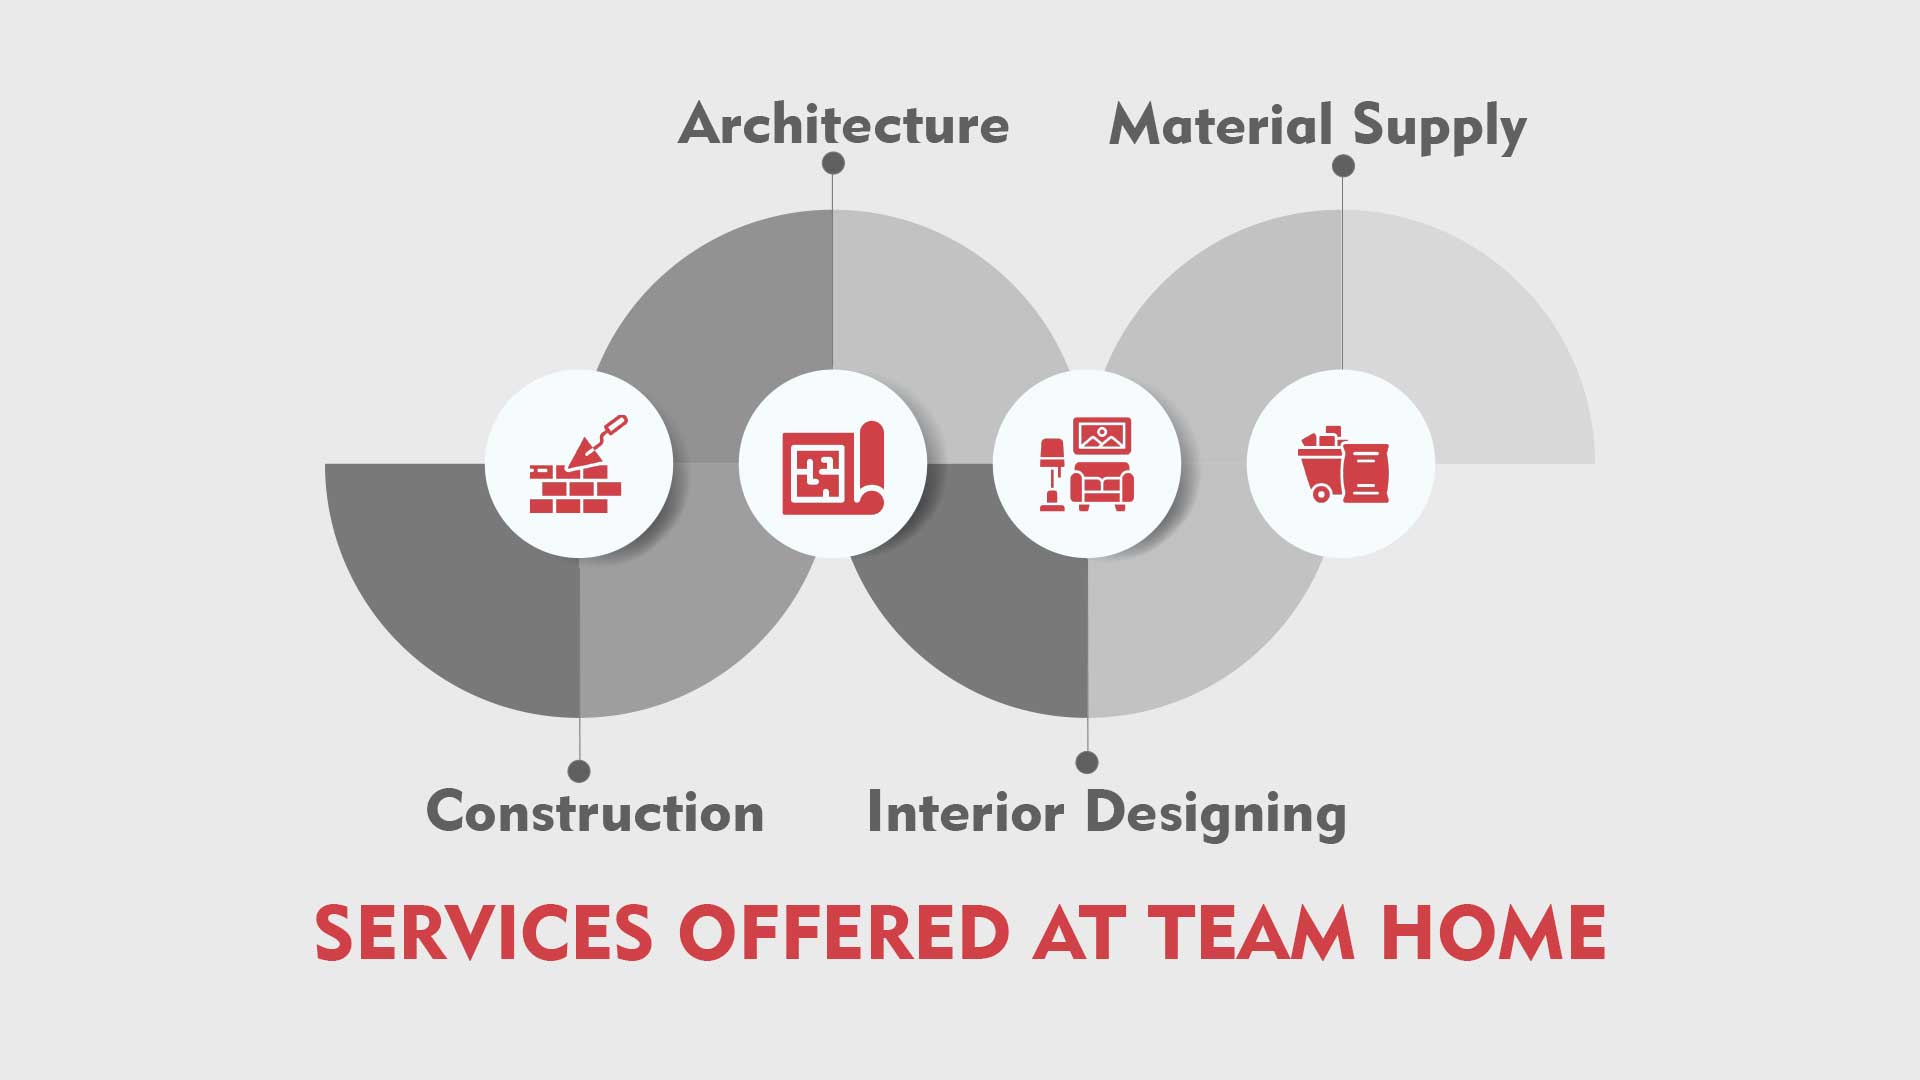 Services offered at TeamHome